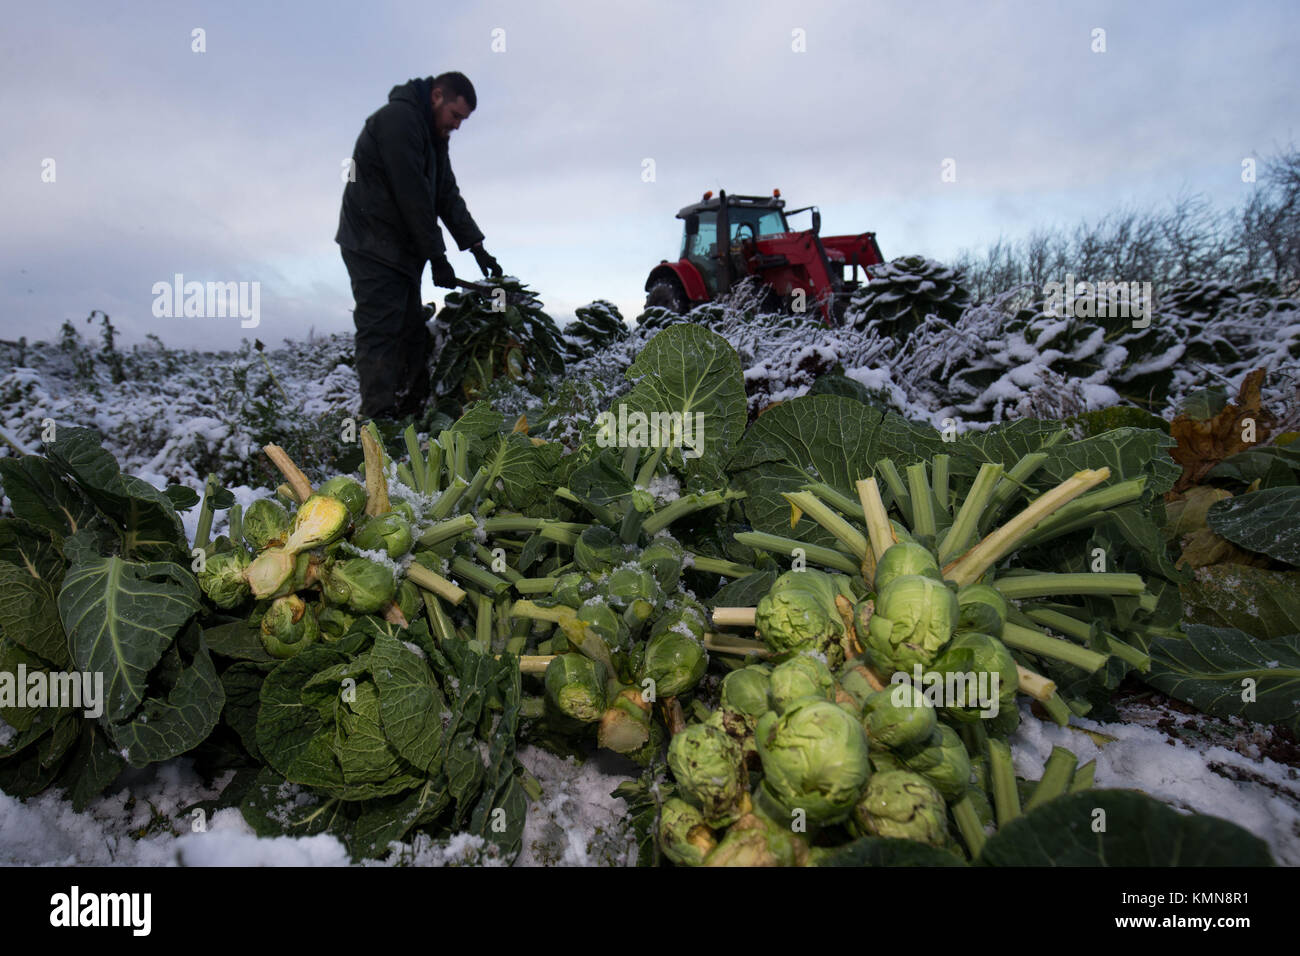 Josh Clewley harvests Brussels sprouts at Essington Farm in Wolverhampton in the run up to Christmas. Parts of Britain woke to a blanketing of snow on Friday morning as forecasters warned up to 20cm (8in) could fall in some places. Stock Photo